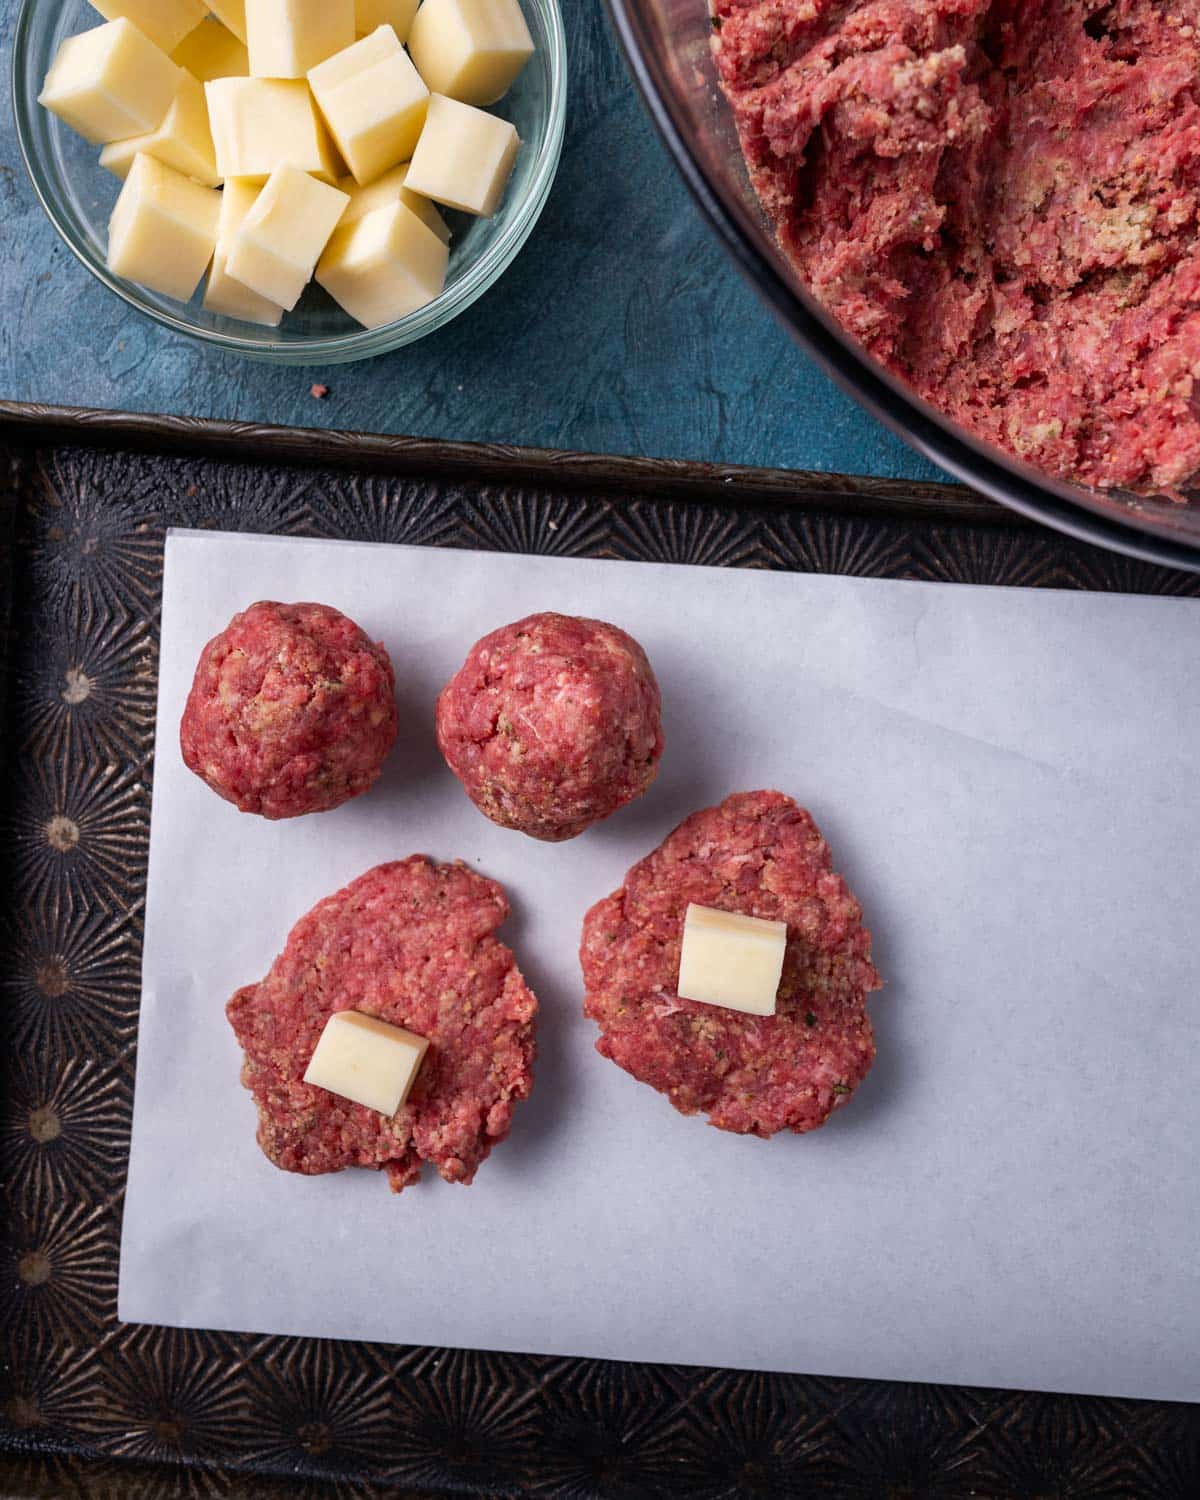 placing cheese cubes inside meatballs